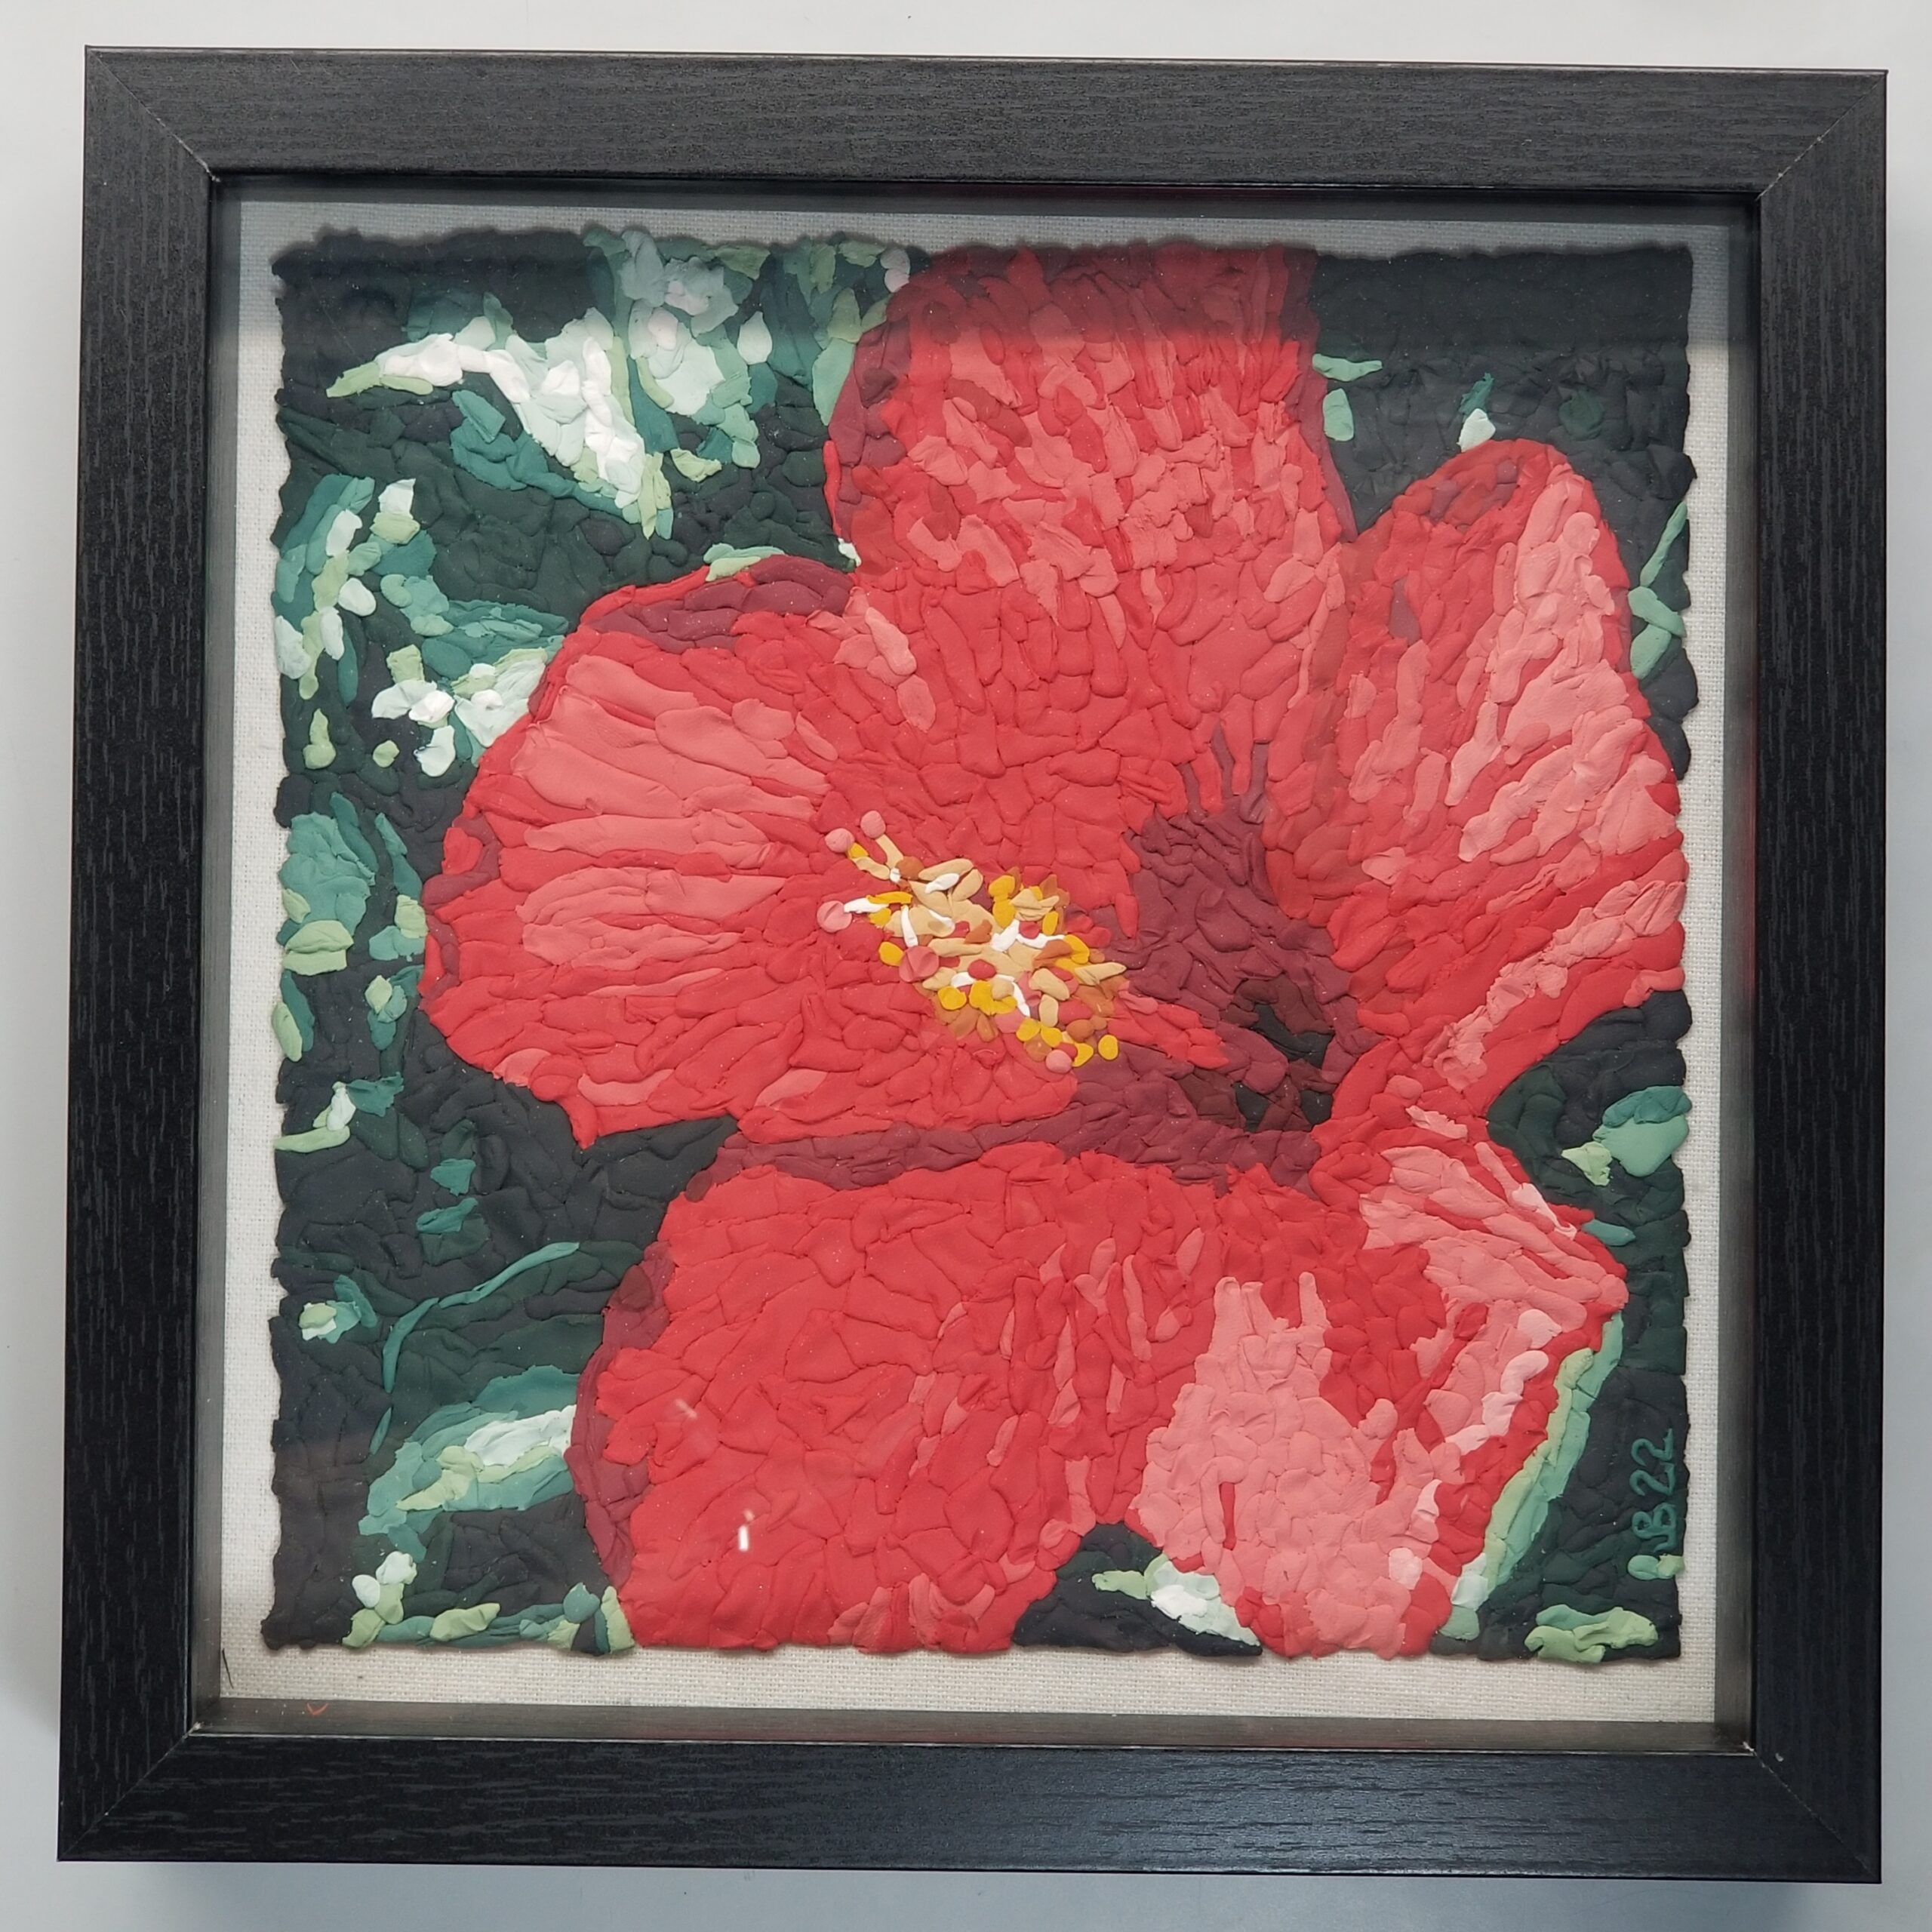 Hibiscus
Polymer clay on linen
9″ x 9″
$400